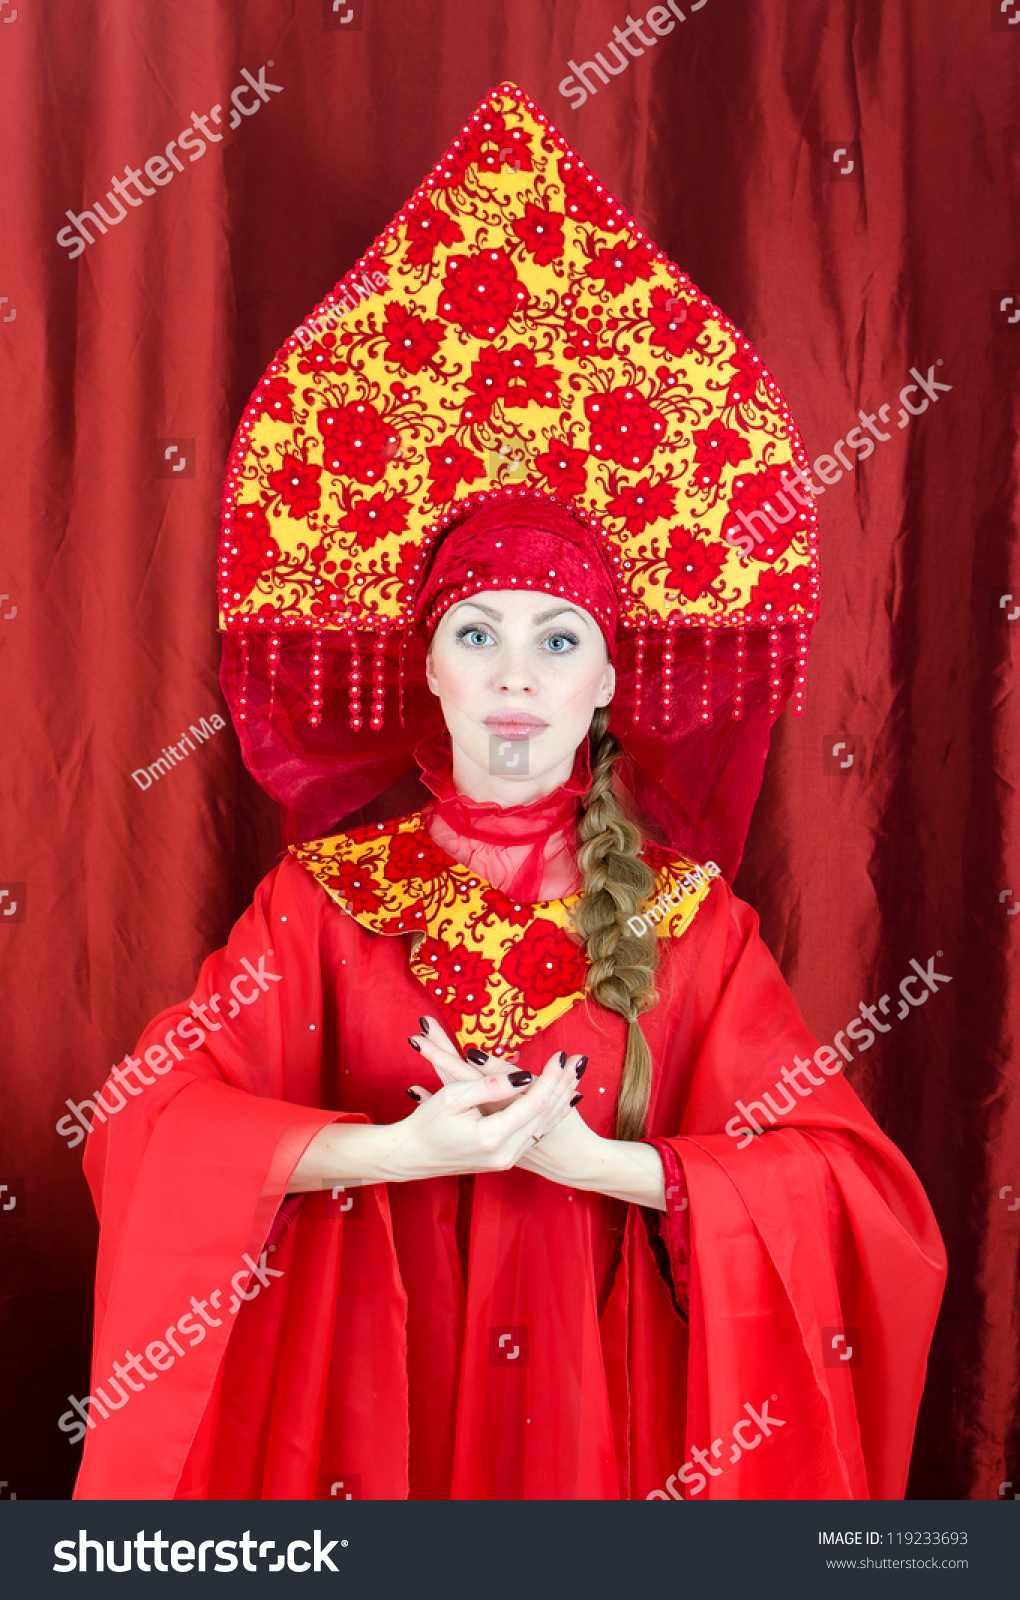 Of Woman In Traditional Russian 72